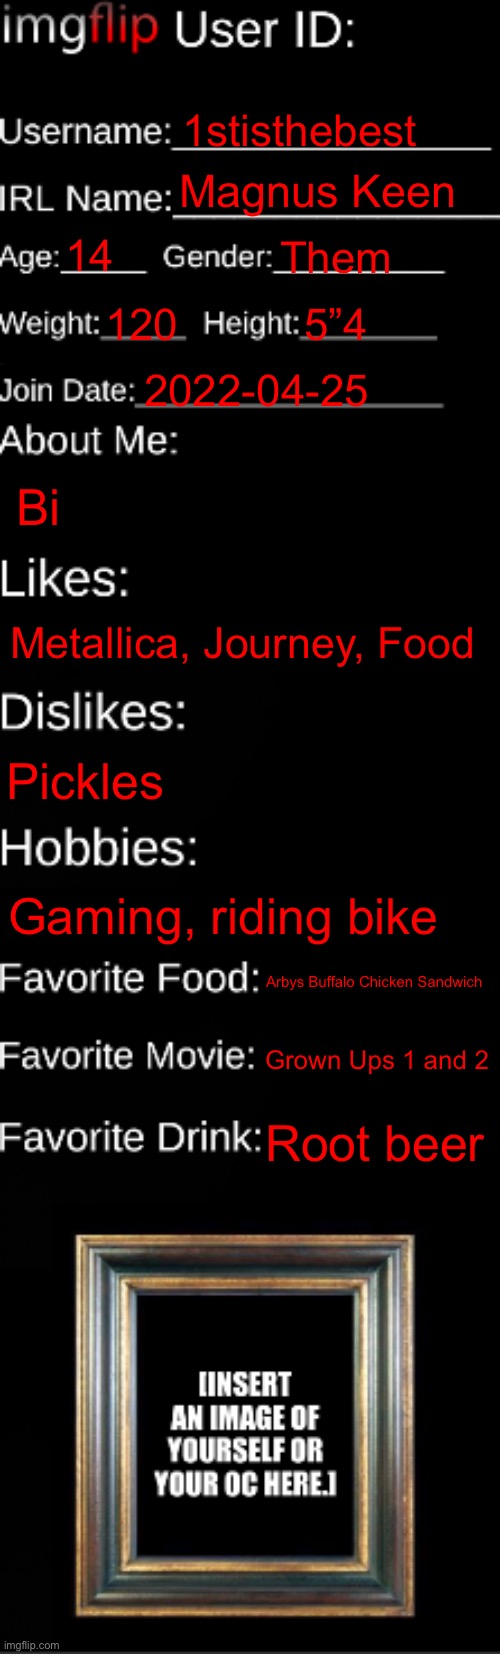 Journey is a band, just so you know | 1stisthebest; Magnus Keen; 14; Them; 120; 5”4; 2022-04-25; Bi; Metallica, Journey, Food; Pickles; Gaming, riding bike; Arbys Buffalo Chicken Sandwich; Grown Ups 1 and 2; Root beer | image tagged in imgflip id card | made w/ Imgflip meme maker